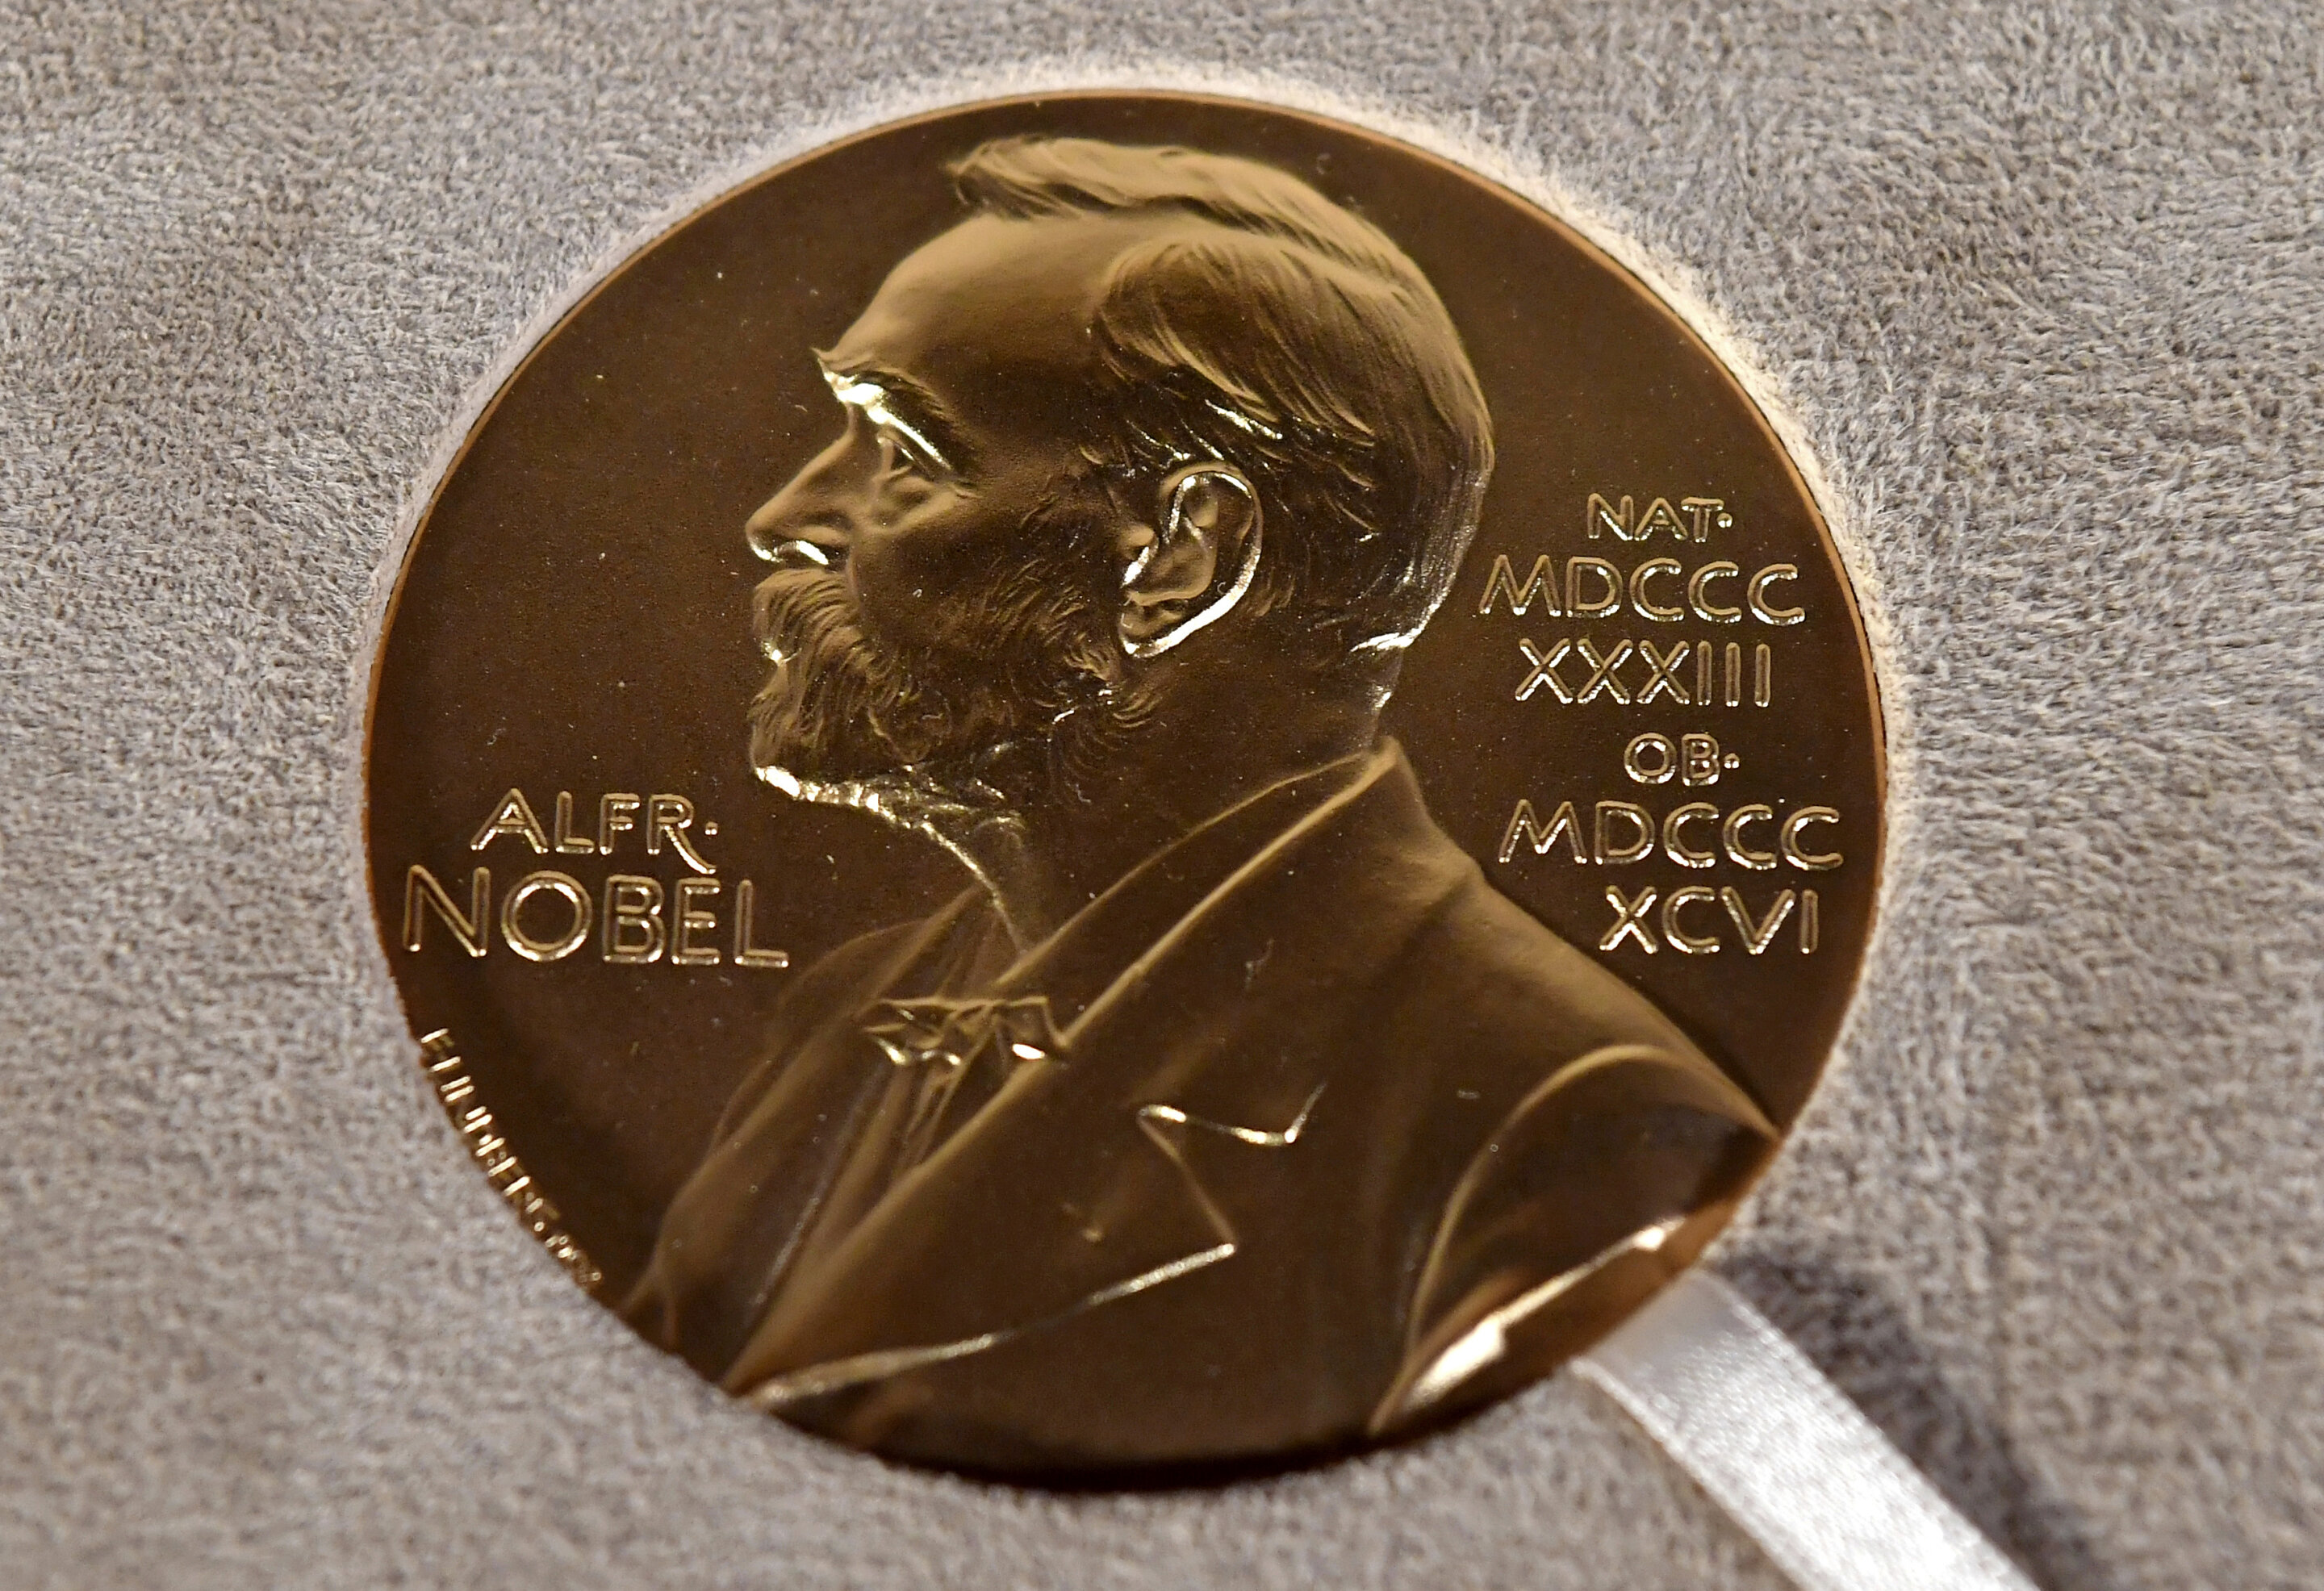 Nobel Prize announcements are getting underway with the unveiling of